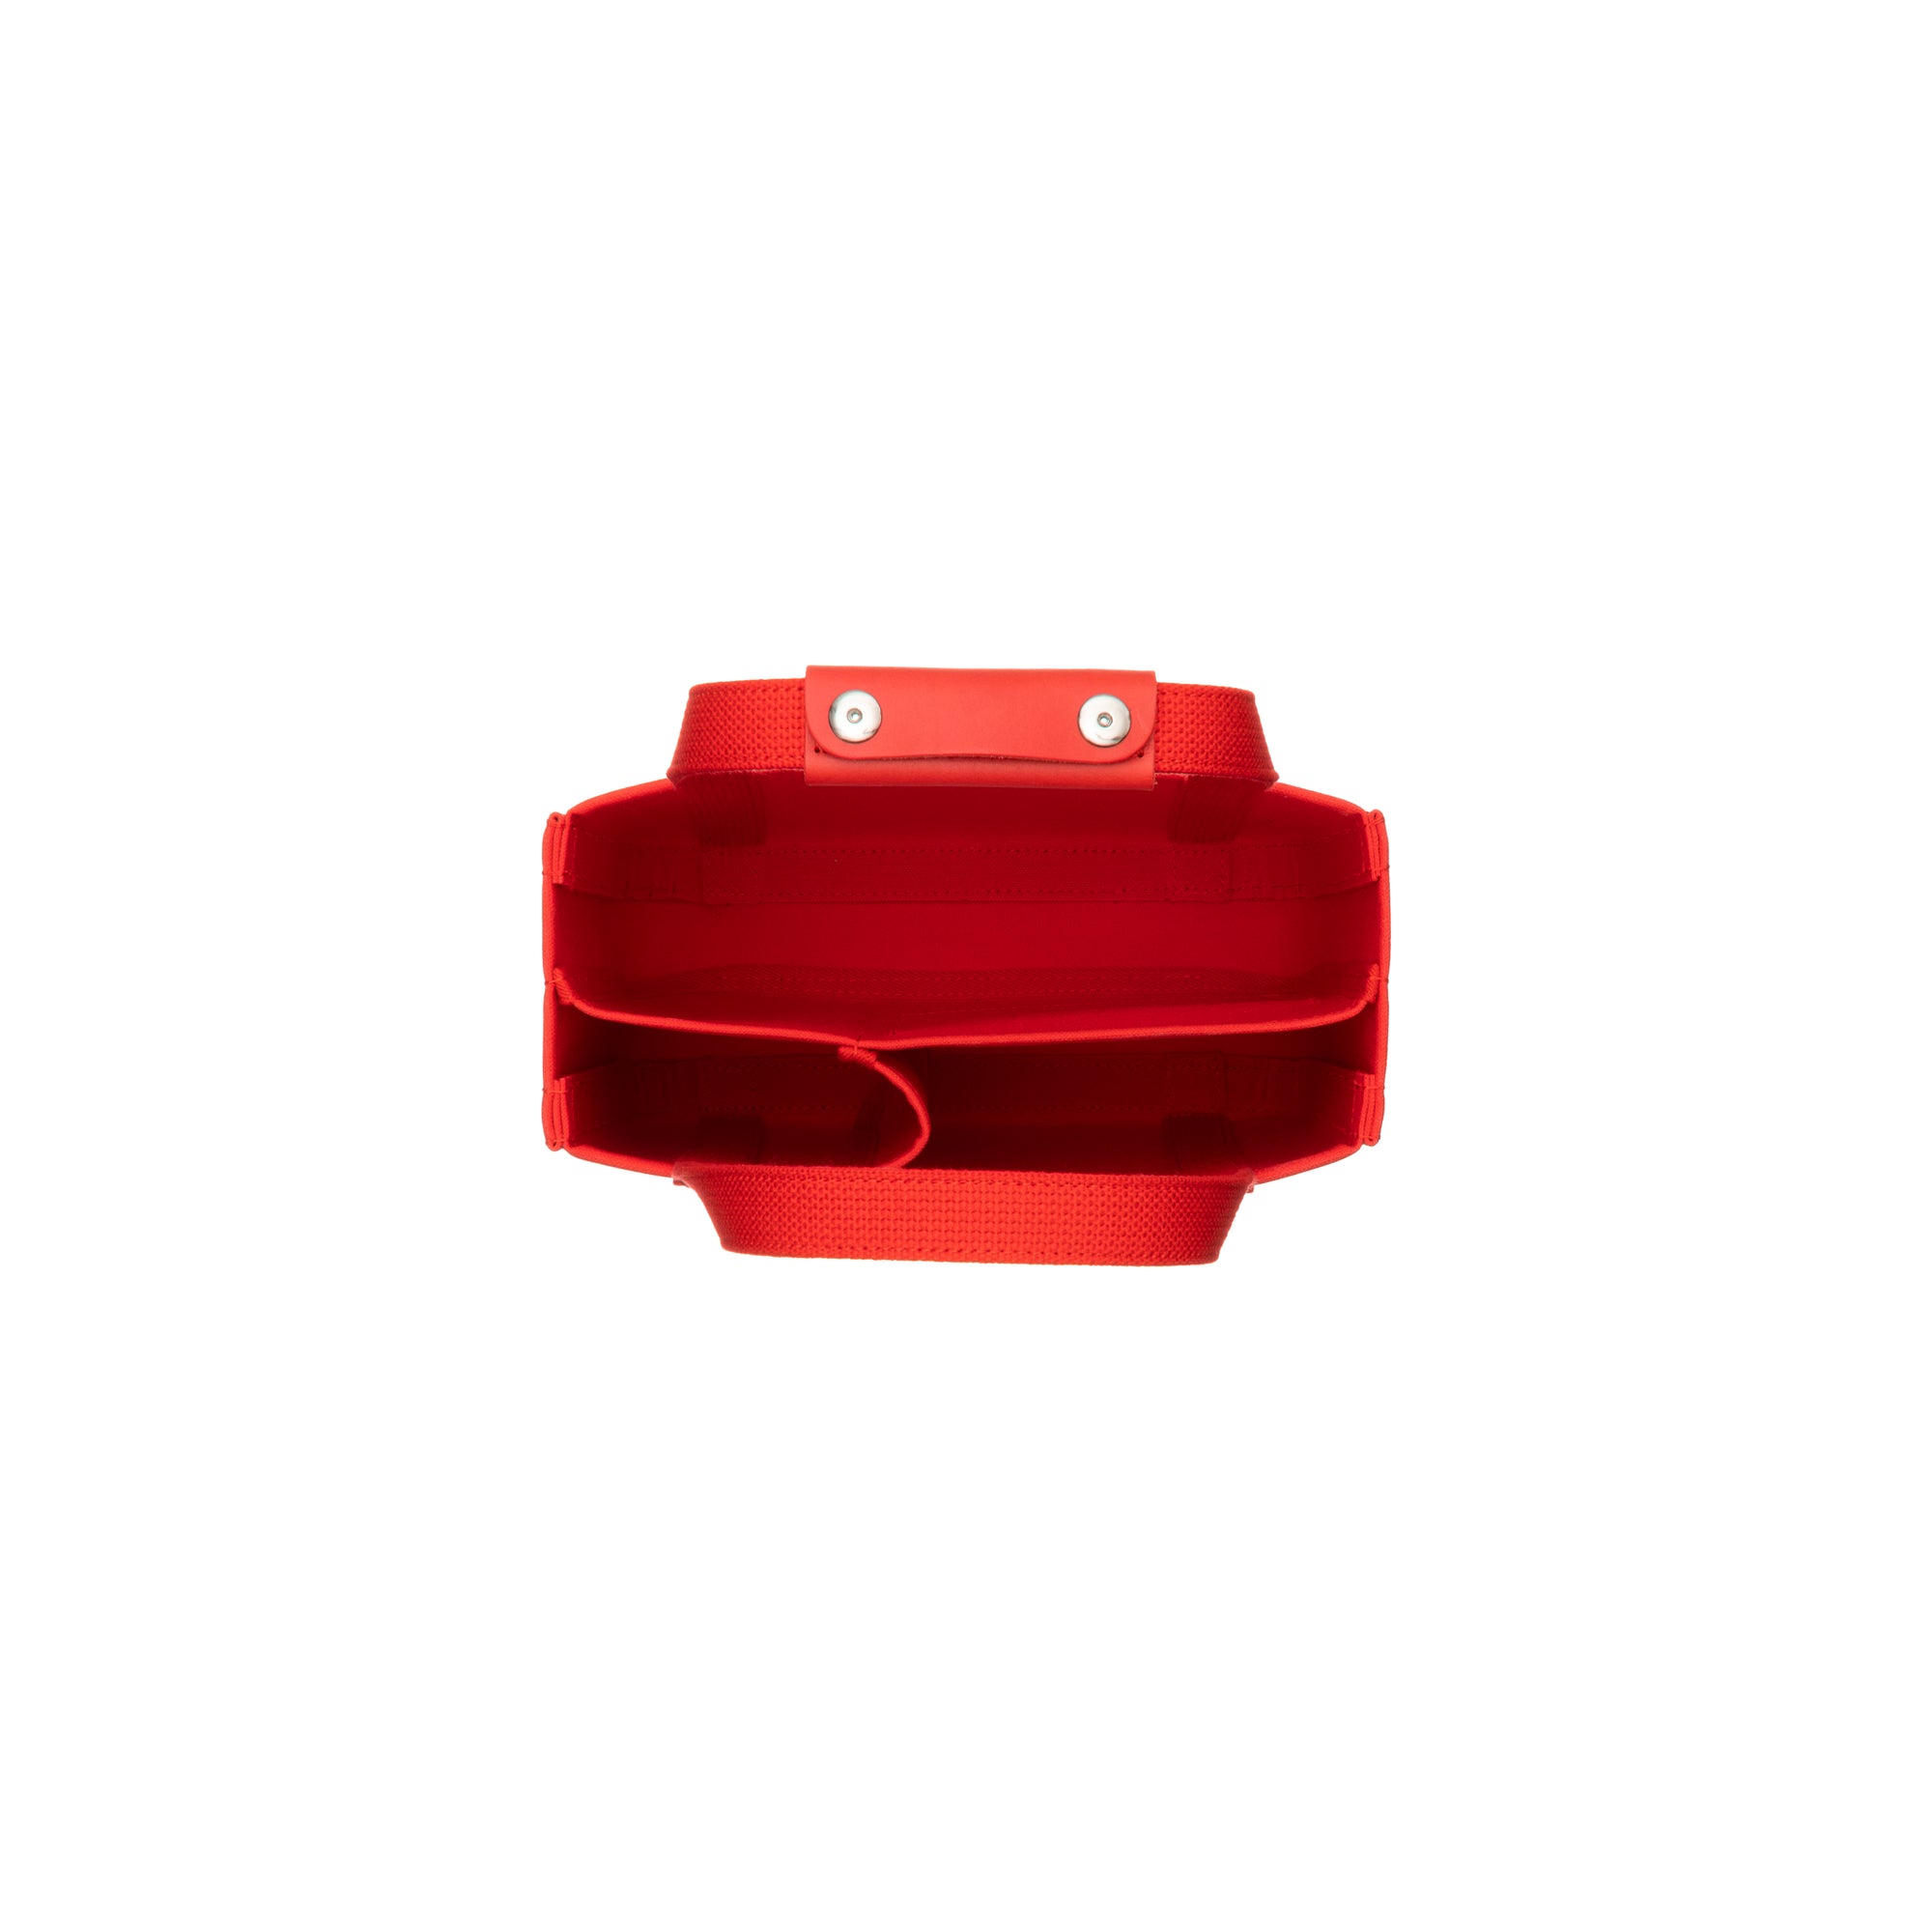 CHACOLI - 06 TOTE W280 X H240 X D120 - (RED) view 3